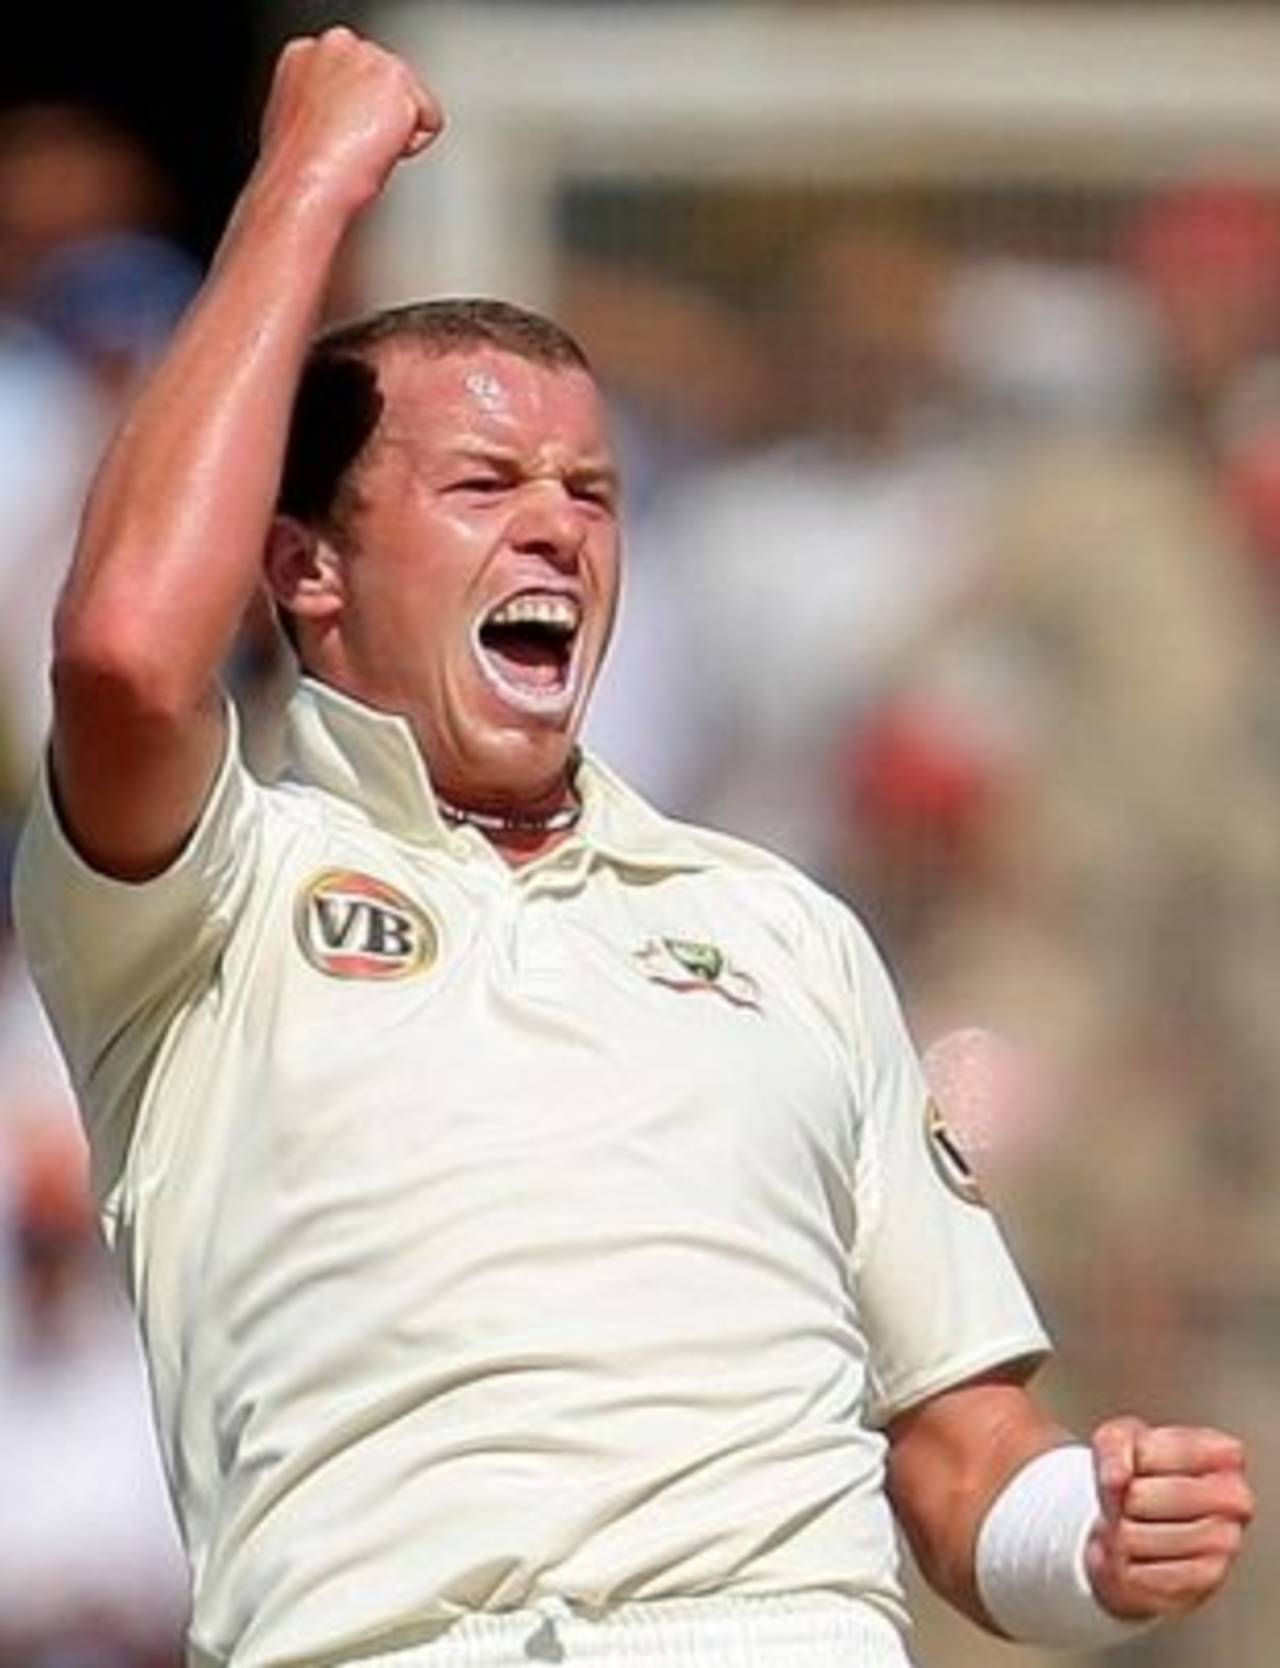 Peter Siddle is pumped up after taking a wicket, India v Australia, 2nd Test, 2nd day, Mohali, October 18, 2008